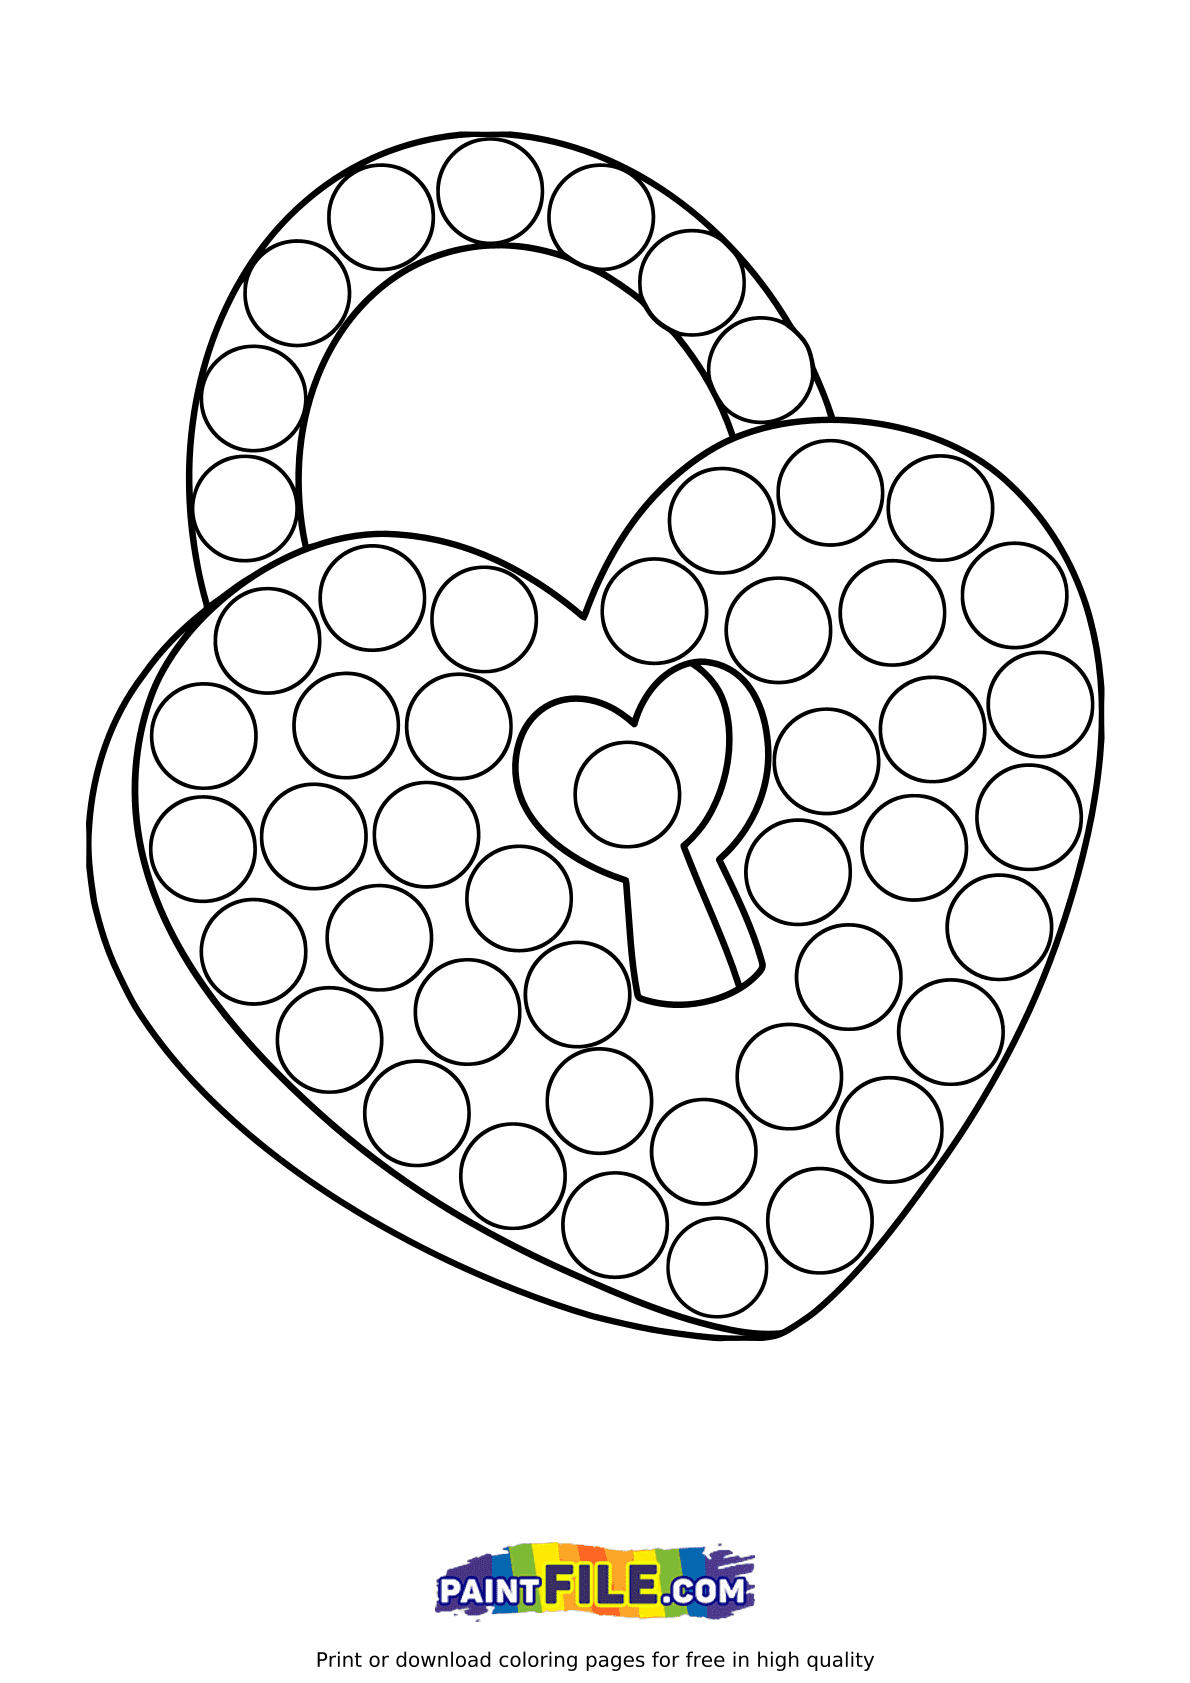 Pop it Lock Heart Coloring Page